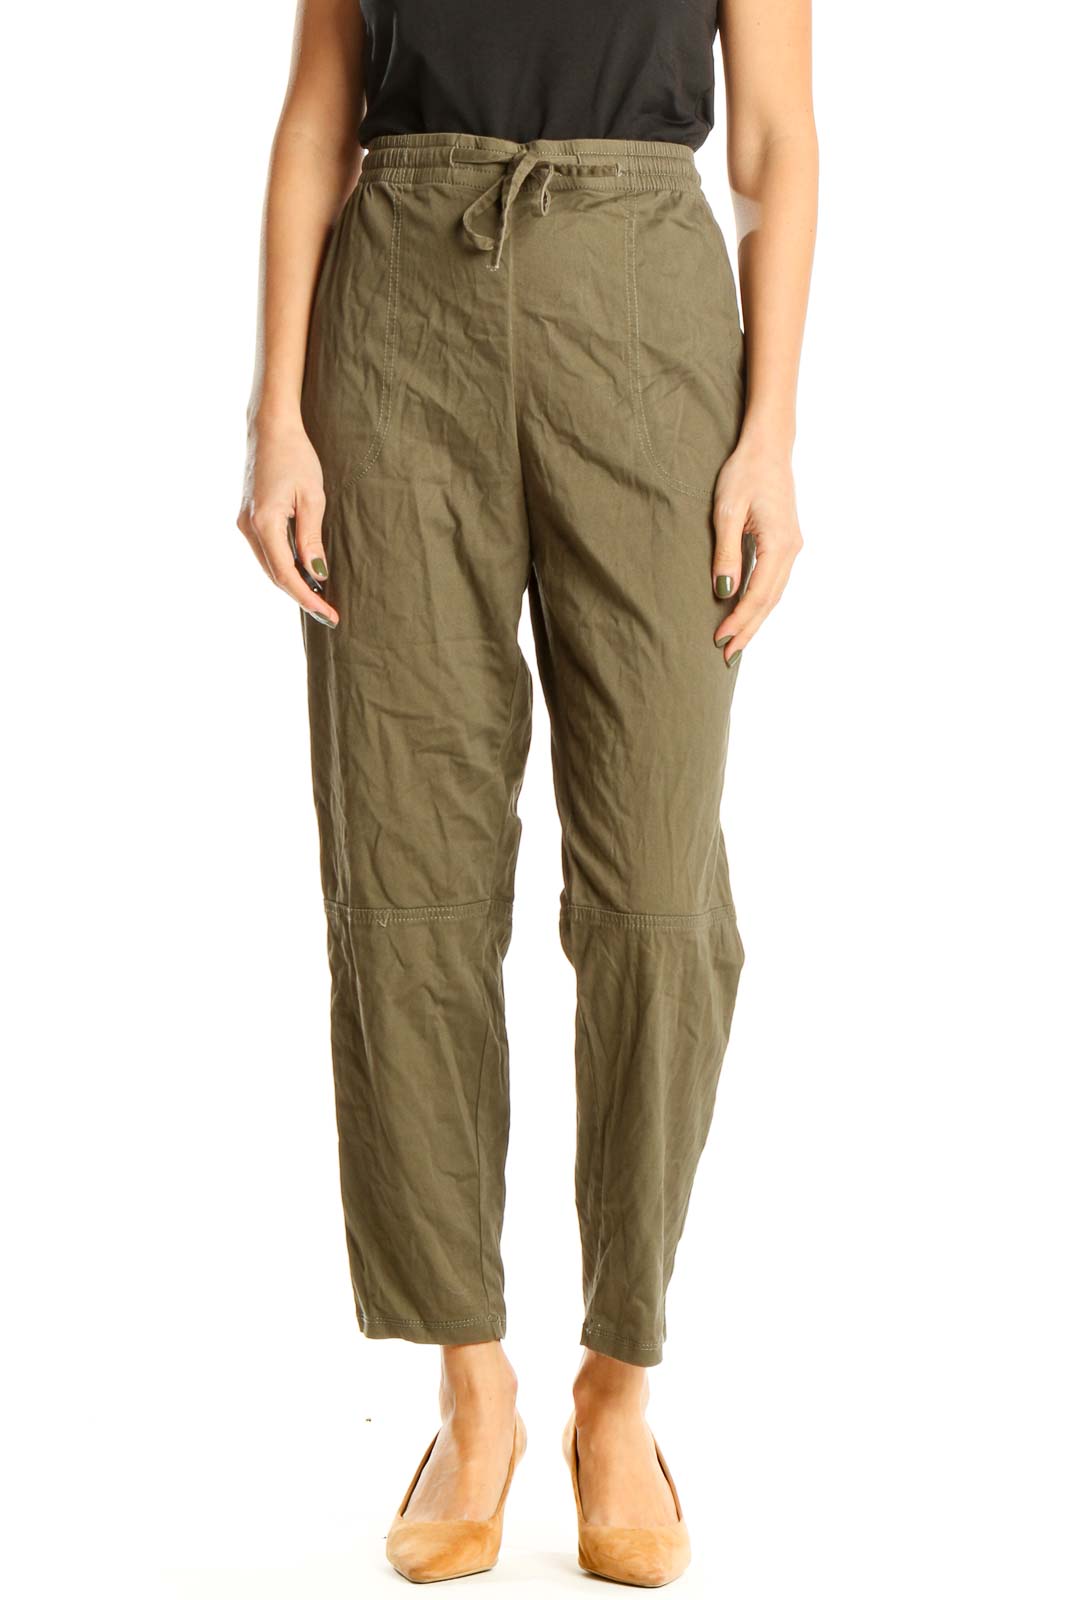 Green Textured All Day Wear Pants Front